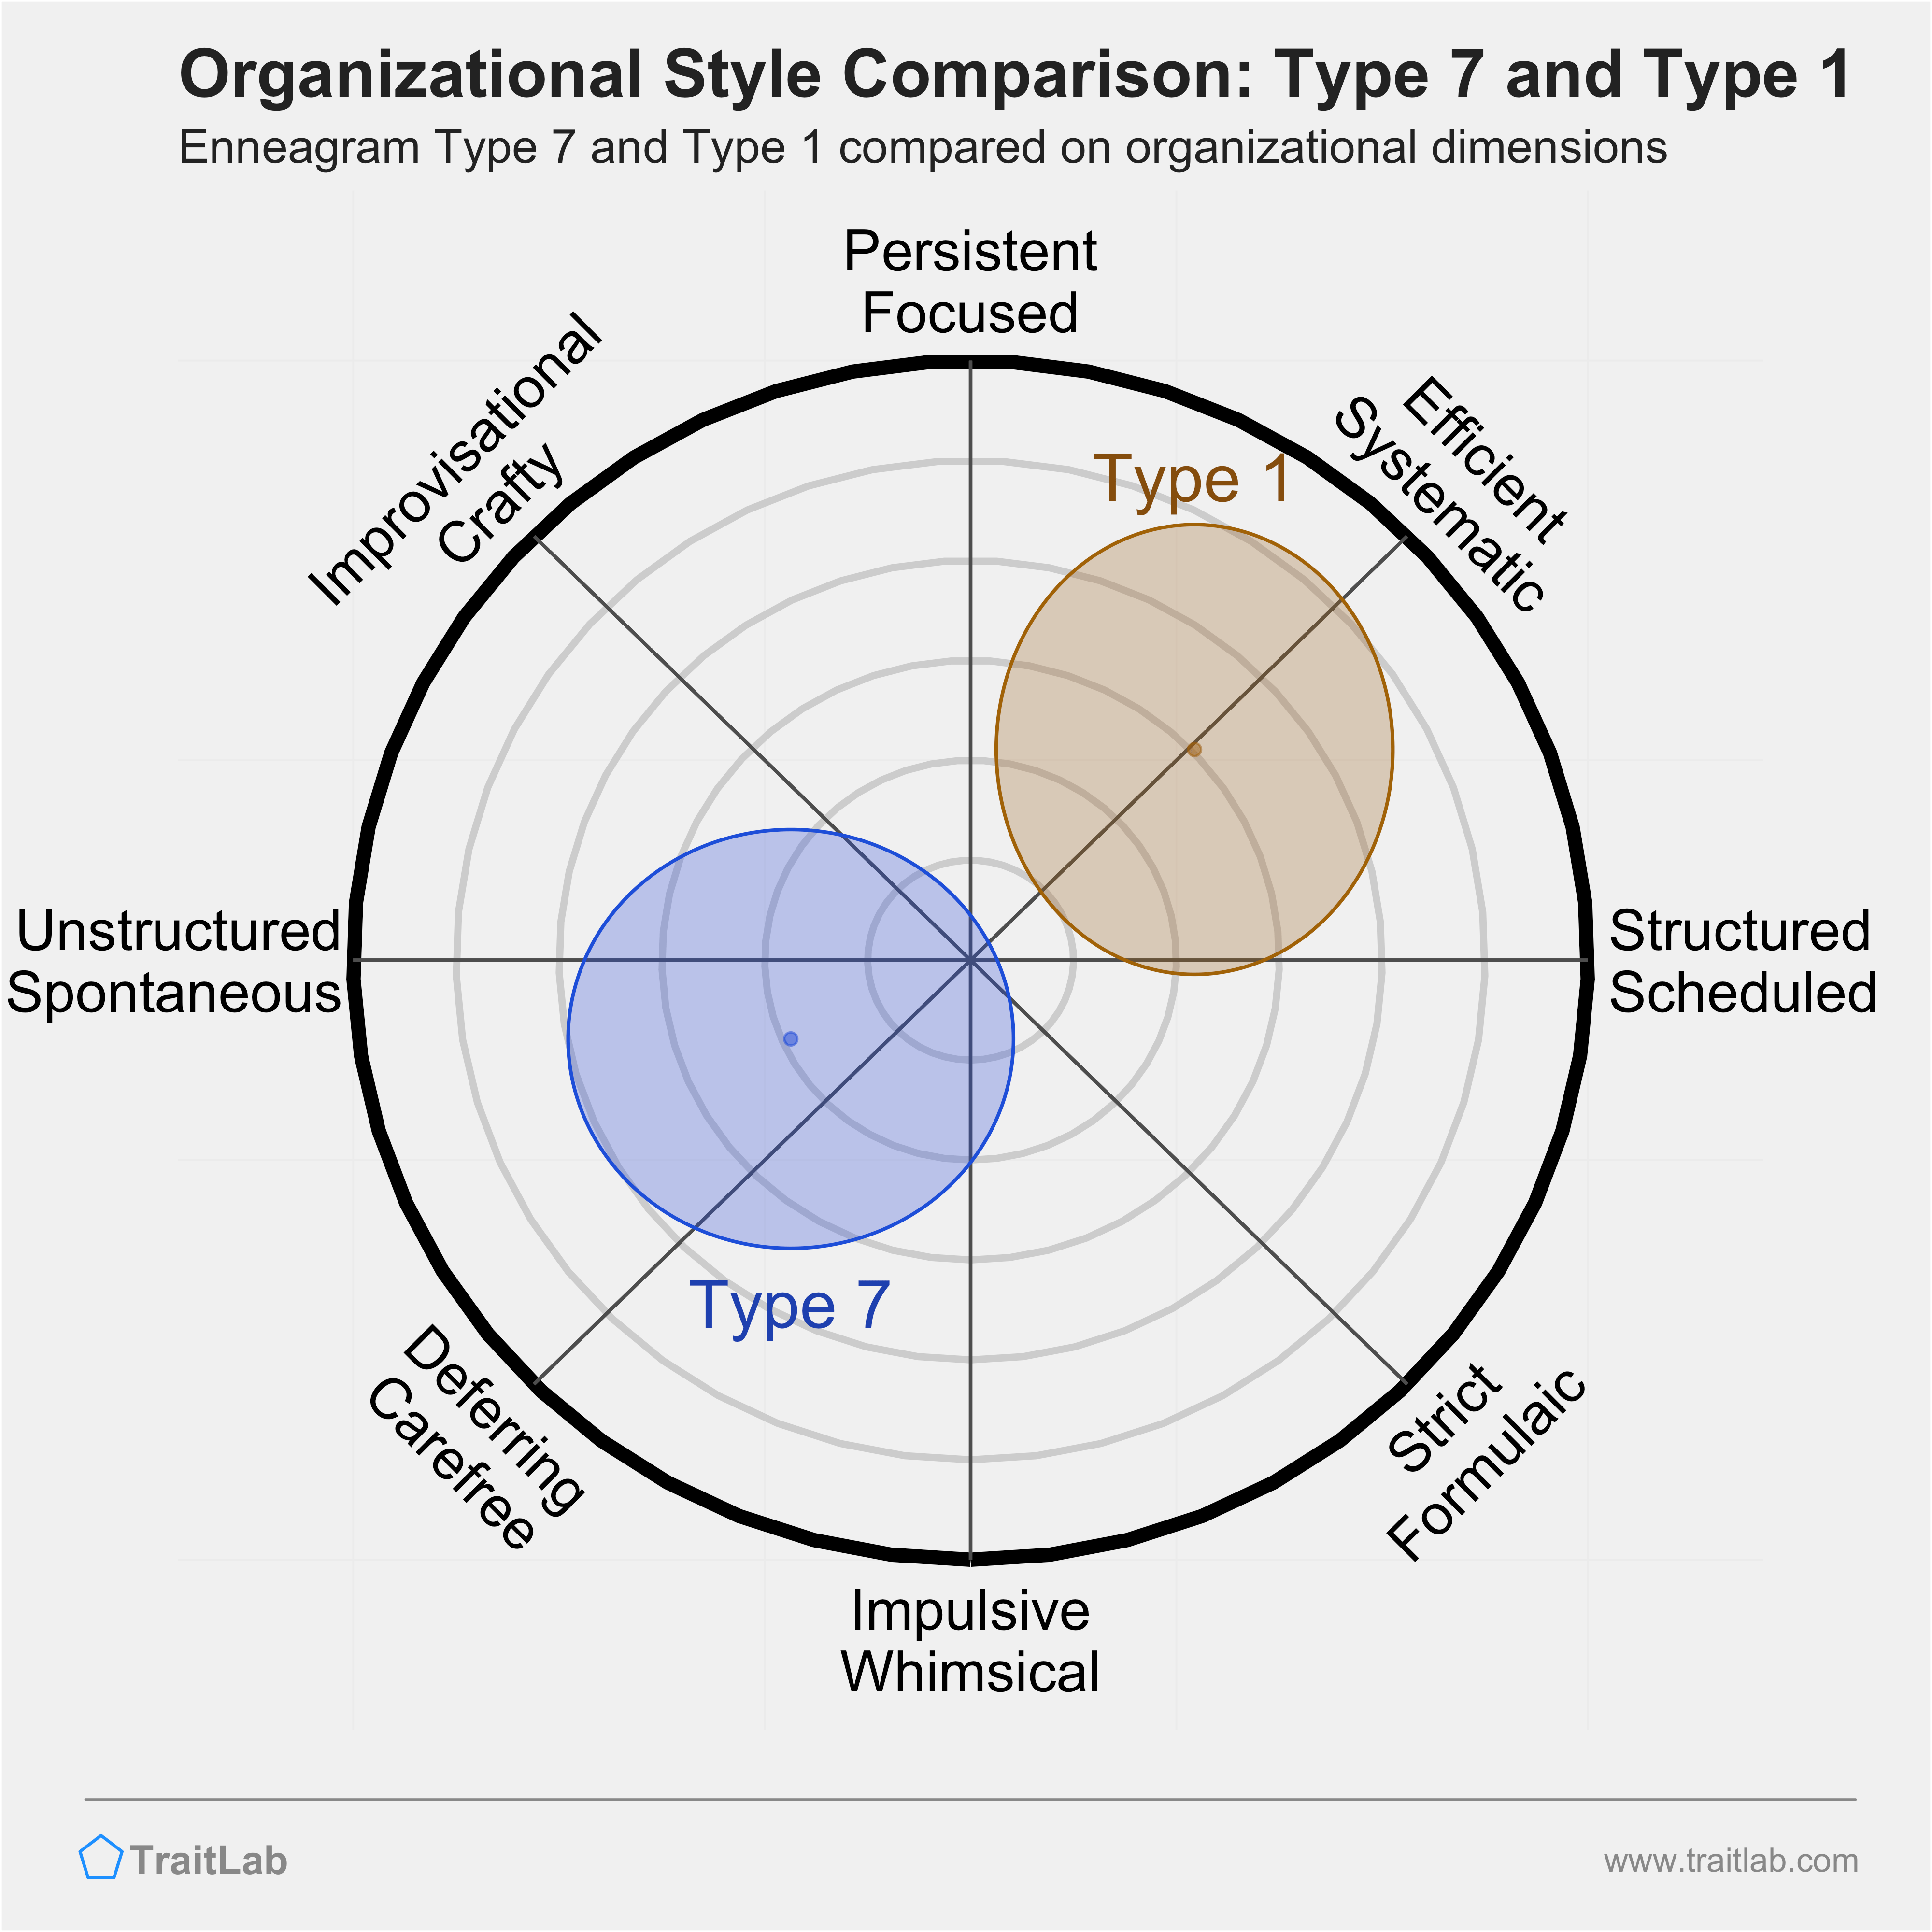 Type 7 and Type 1 comparison across organizational dimensions